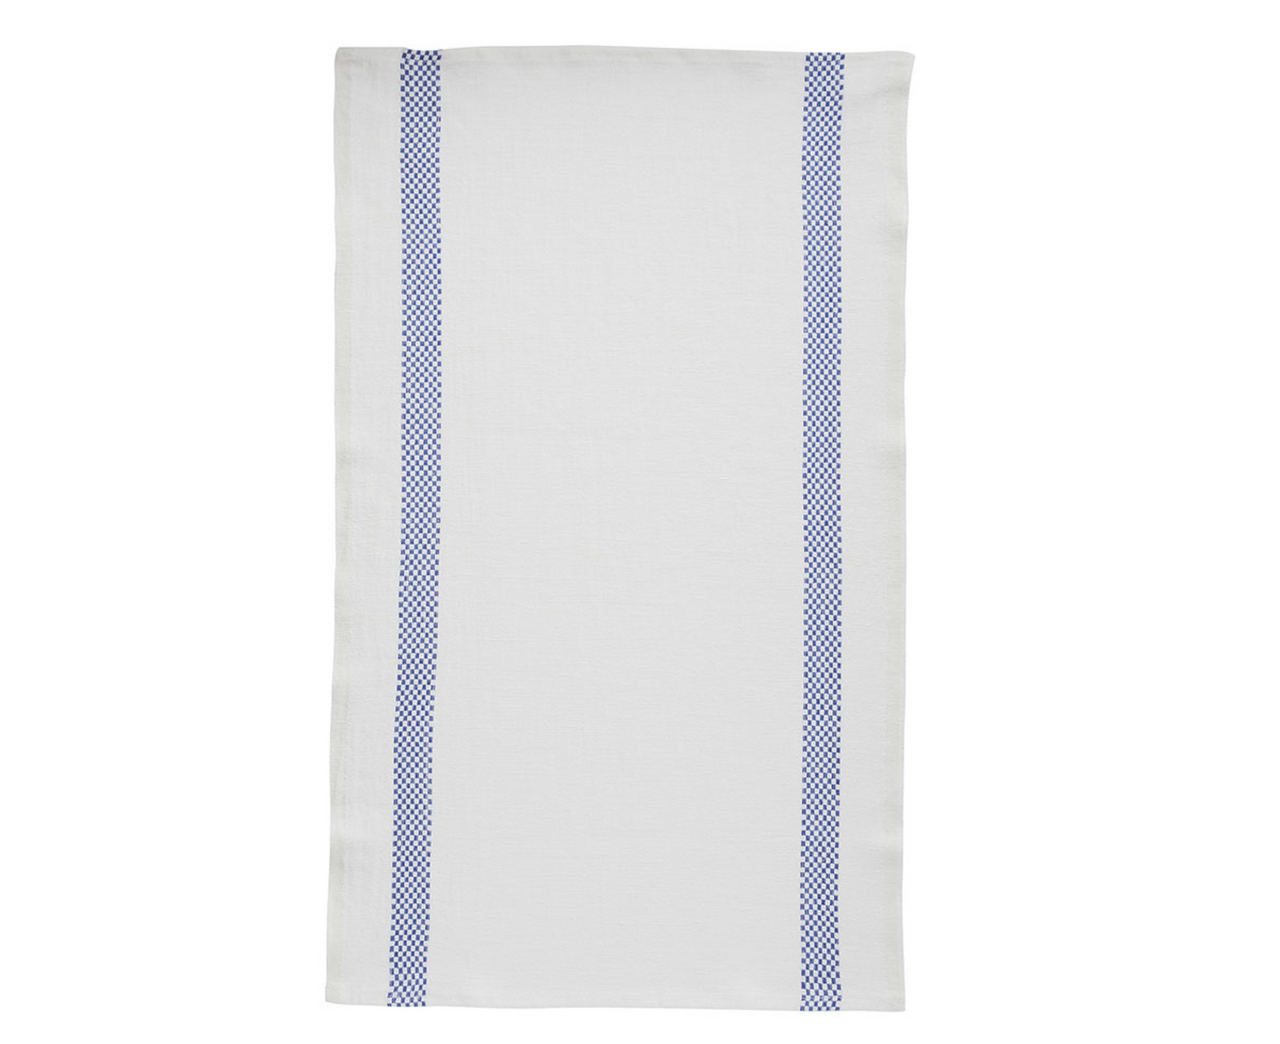 Stonewashed linen - pure 100% flax linen kitchen tea towel or hand towel  white navy blue stripes stone washed pre-washed laundered Europe European  linen lint free fast dry antibacterial wipe glassware pinstripes